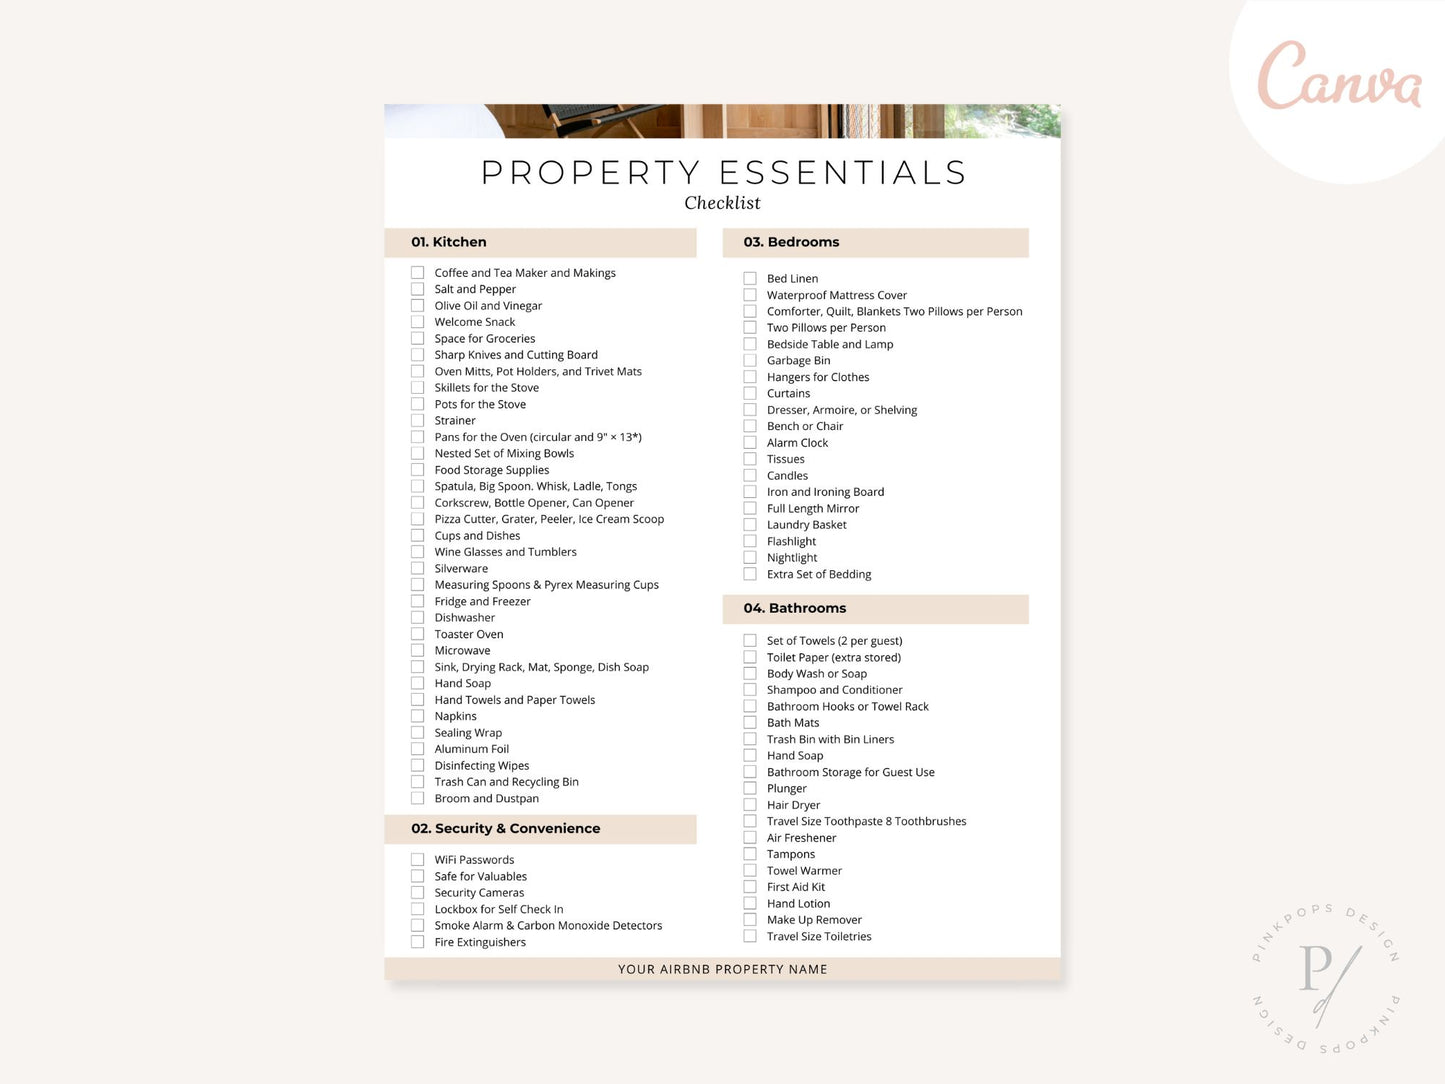 Airbnb Property Essentials Checklist - Comprehensive and editable template for ensuring essential amenities in your vacation rental property.